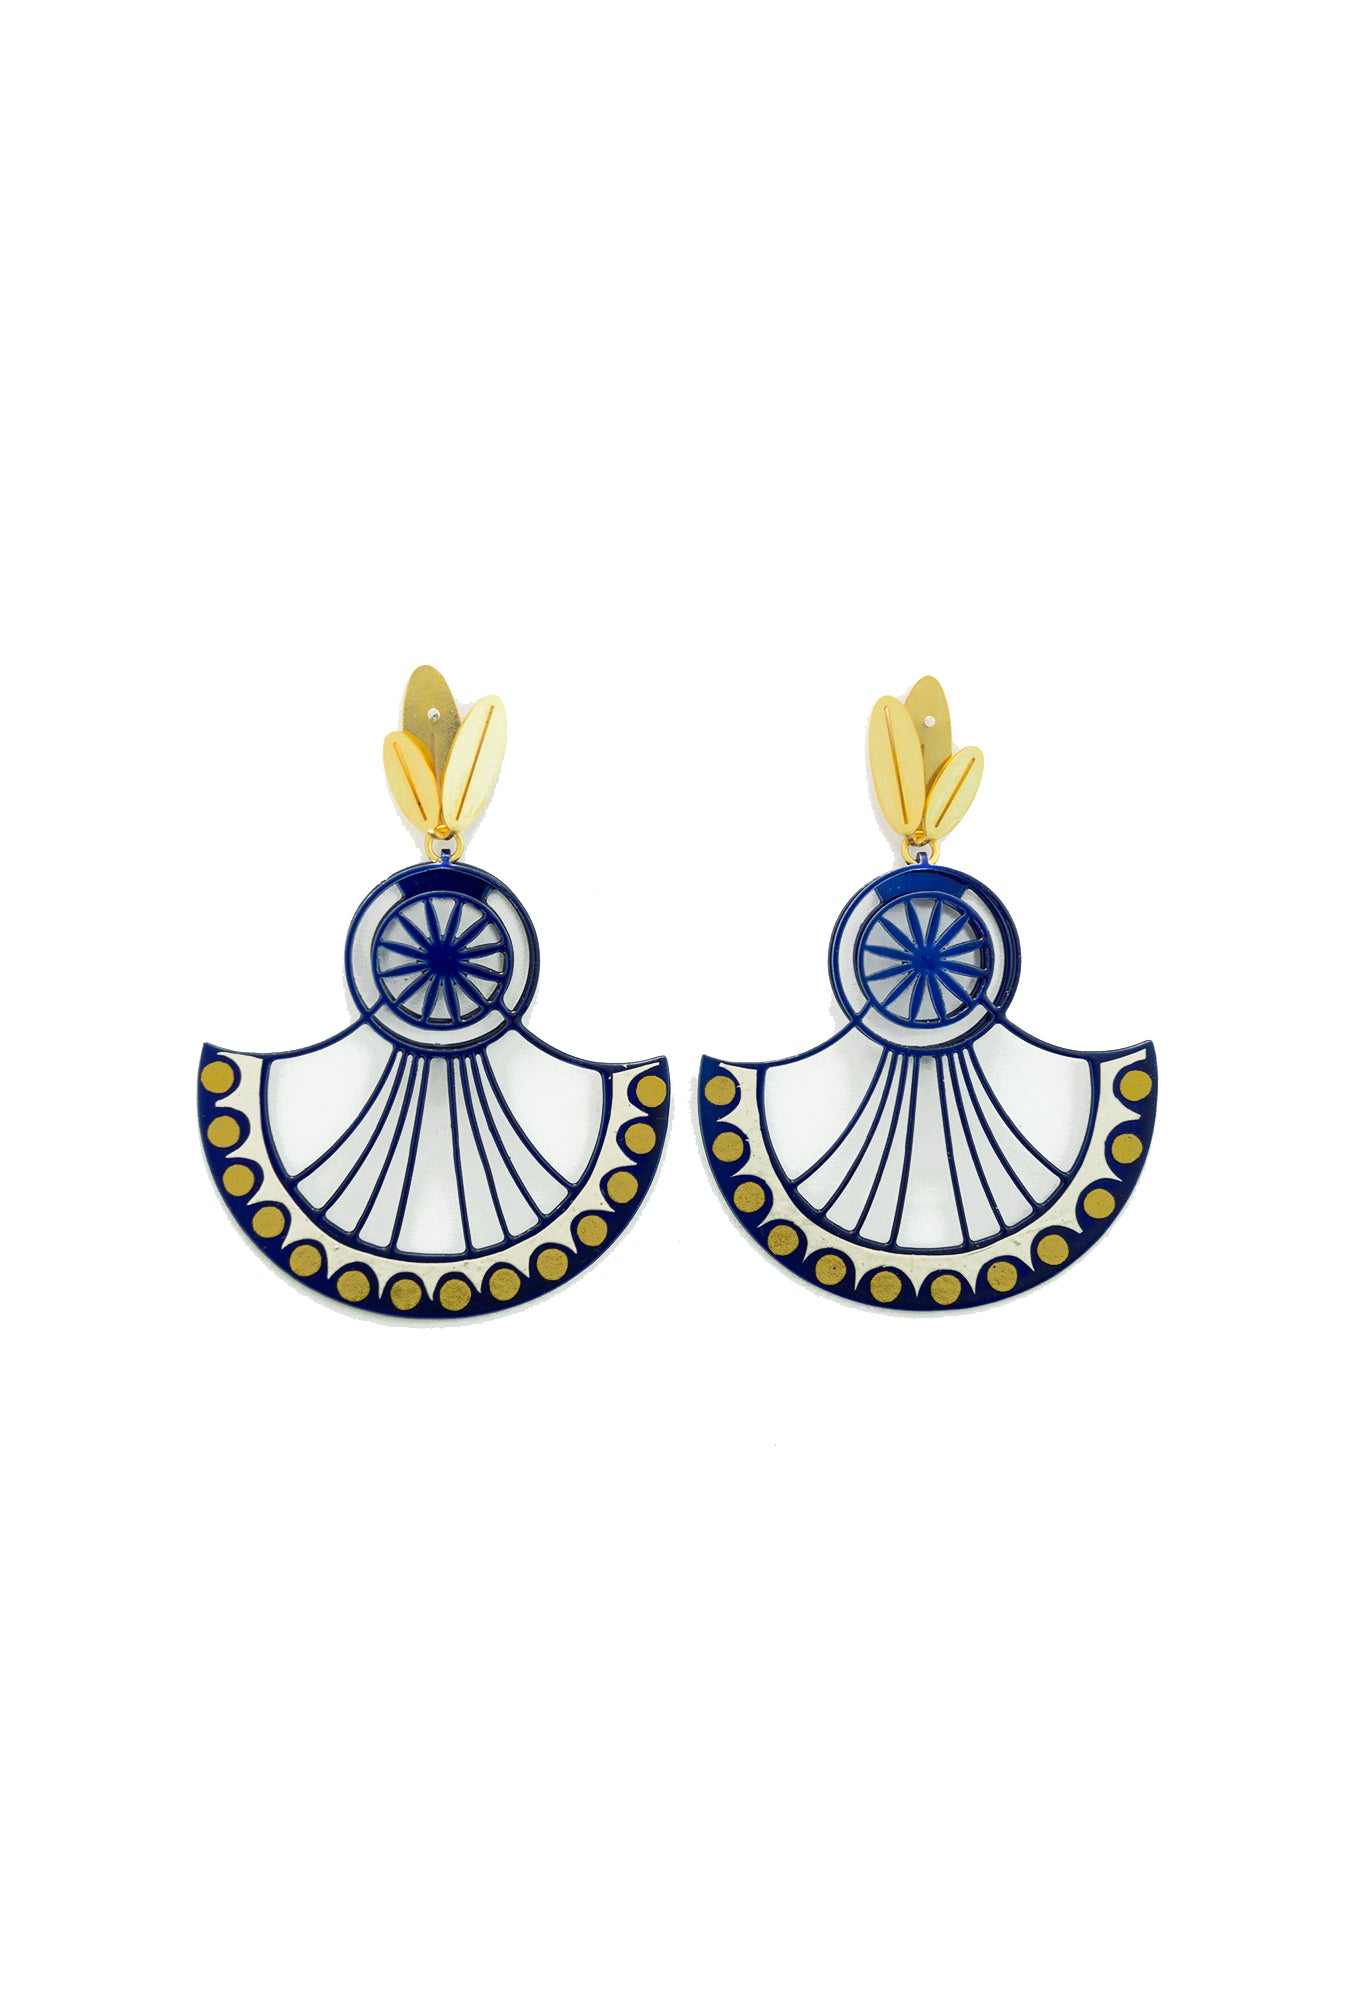 Discover 248+ blue traditional earrings best